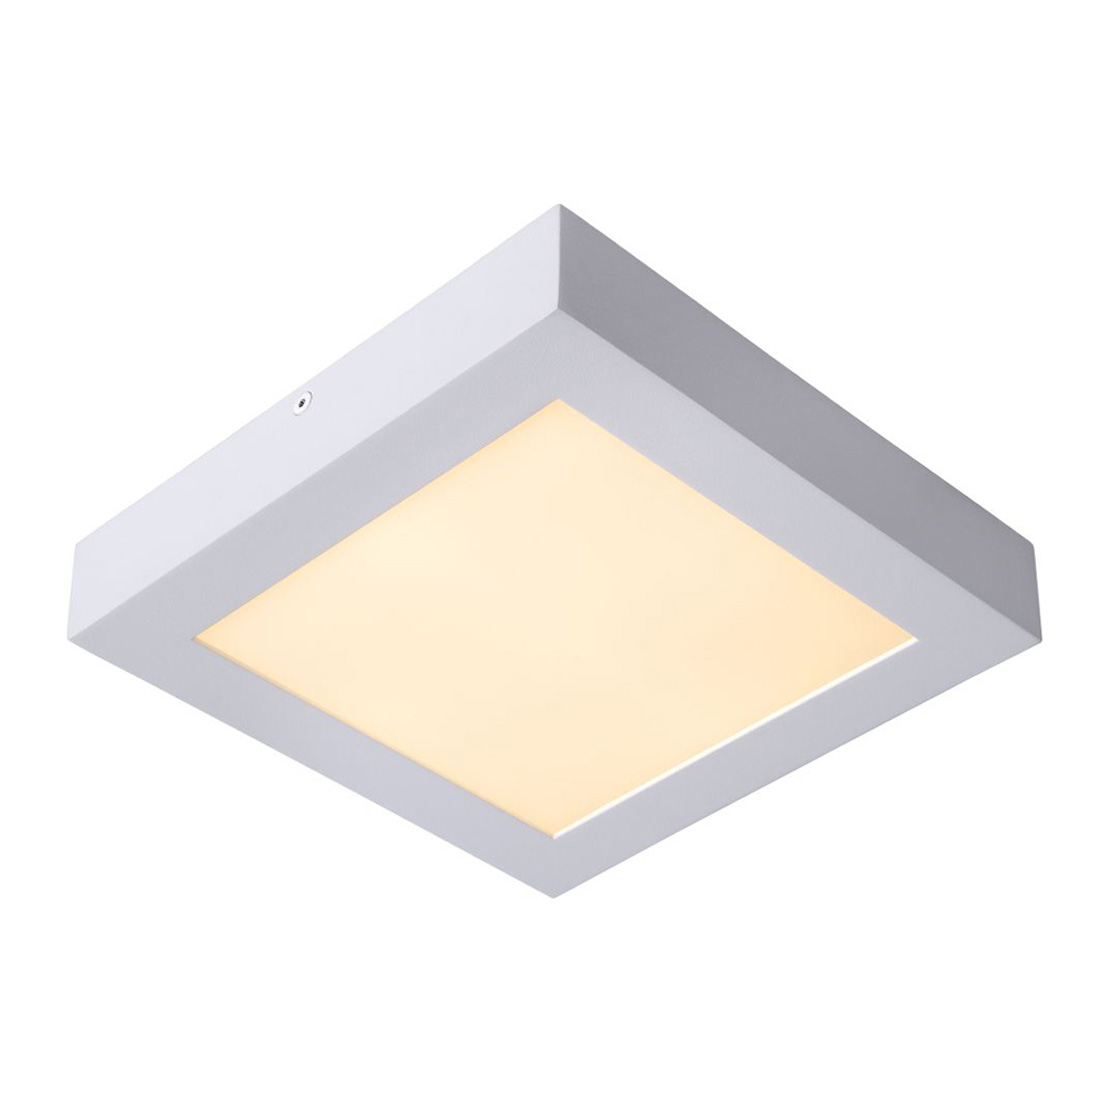 Lucide BRICE-LED - Ceiling light - White - Integrated LED - 216 x 0,09W (incl.)